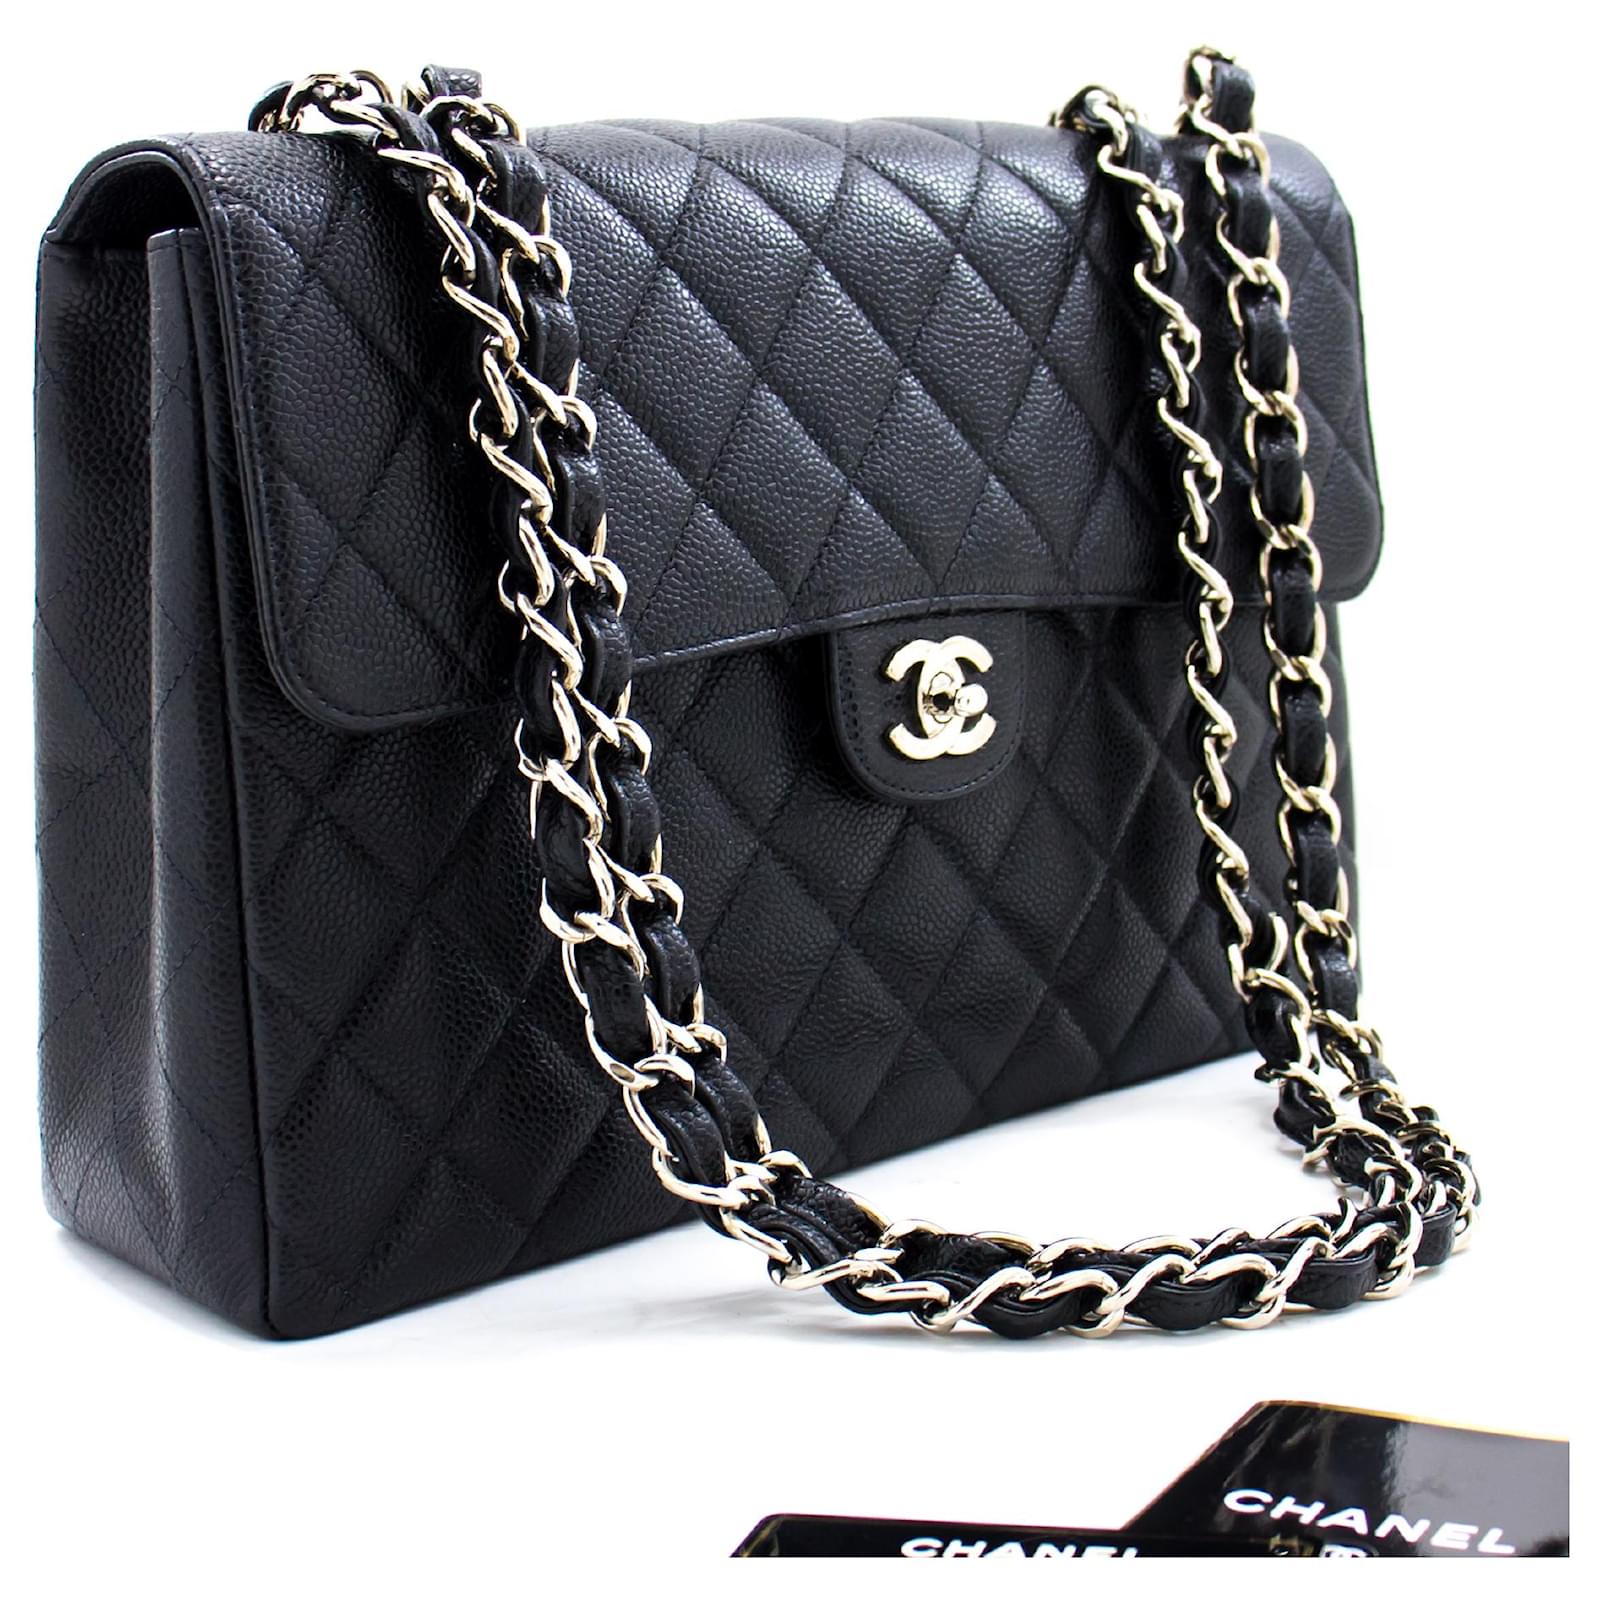 Chanel Black Quilted Leather Large Classic Shopping Tote Bag